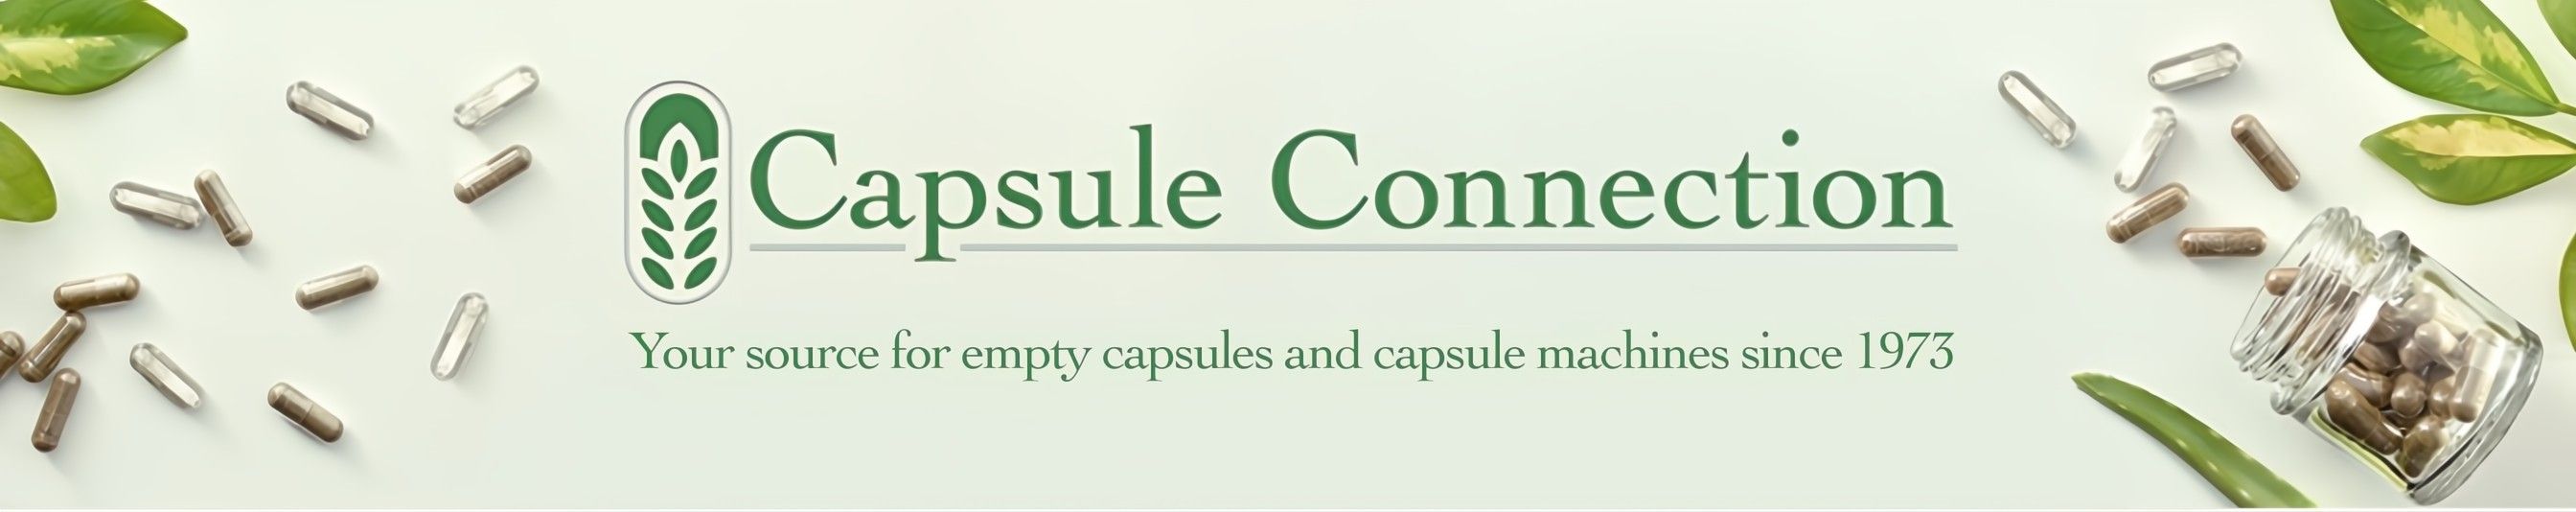 THE CAPSULE CONNECTION